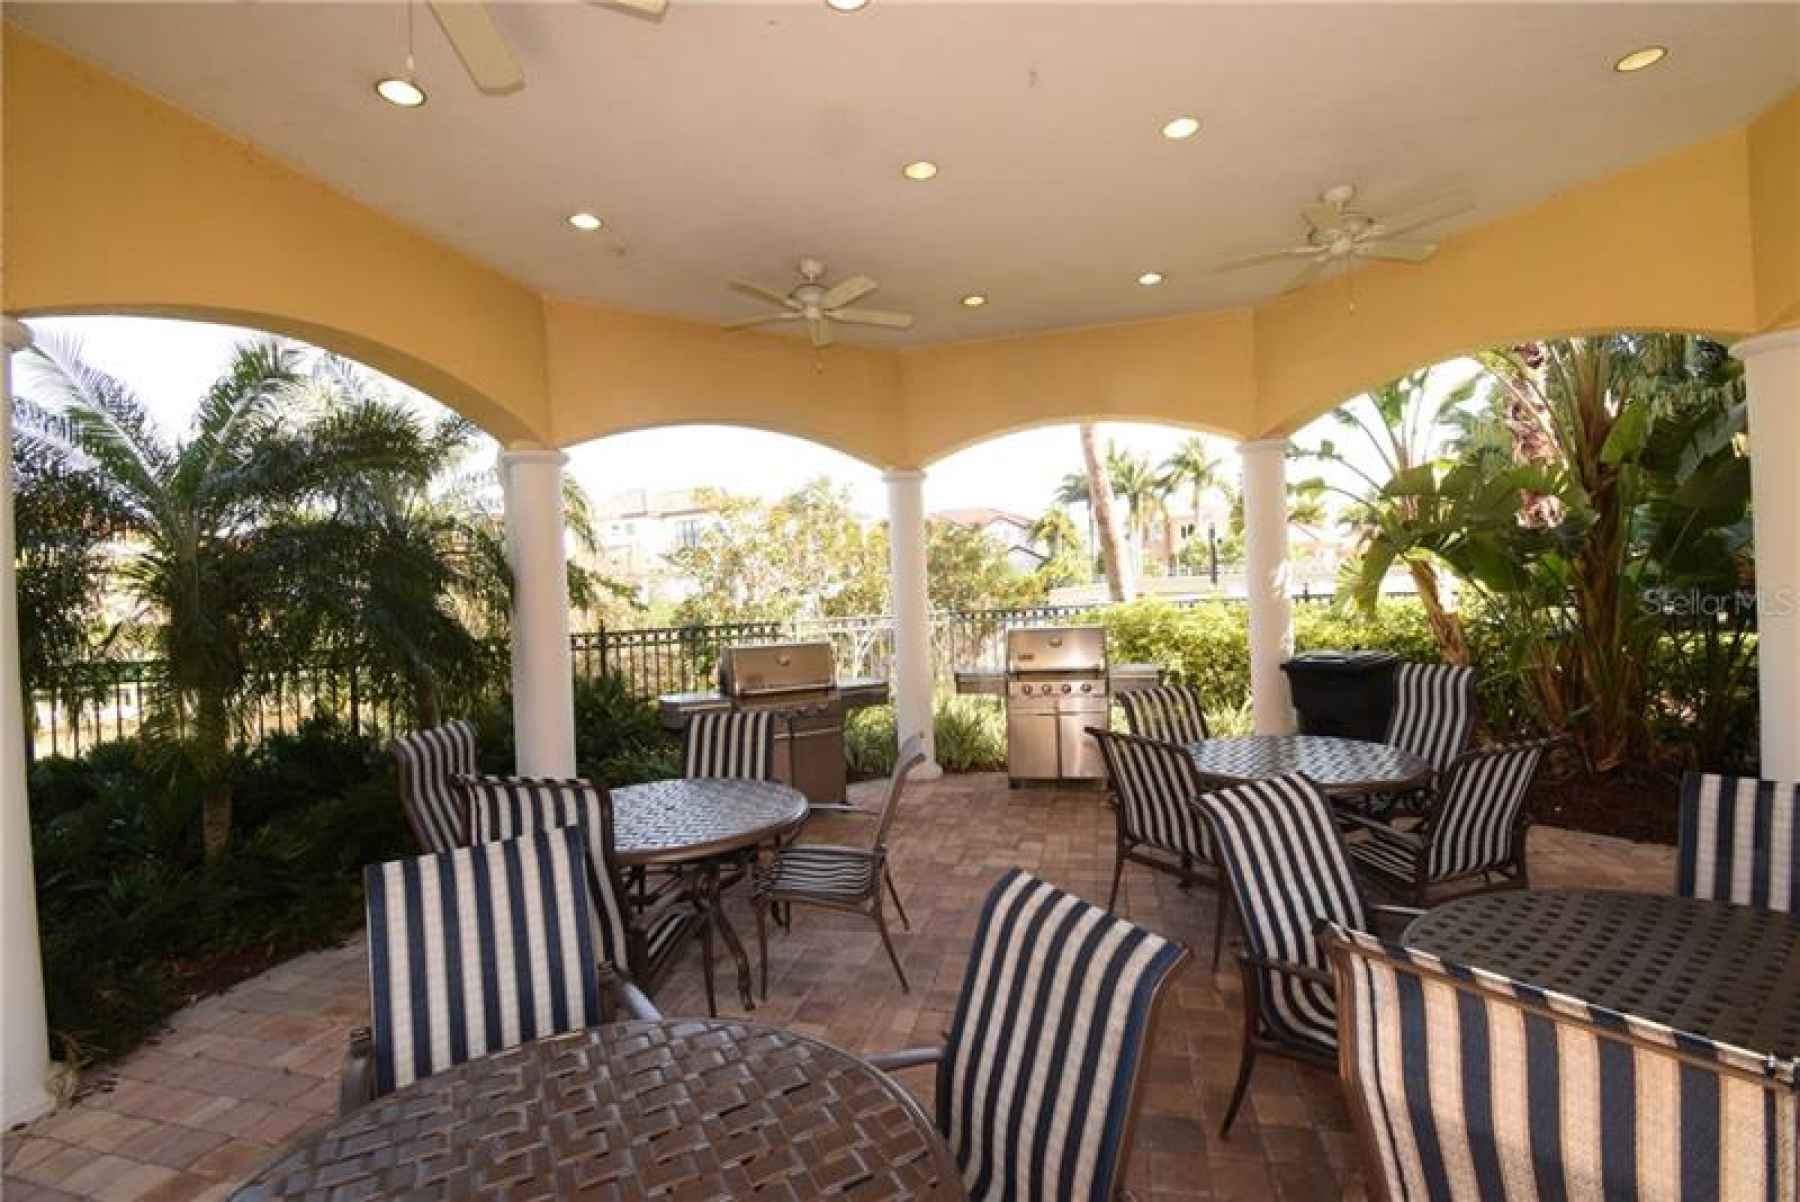 Clubhouse cabana with grills.